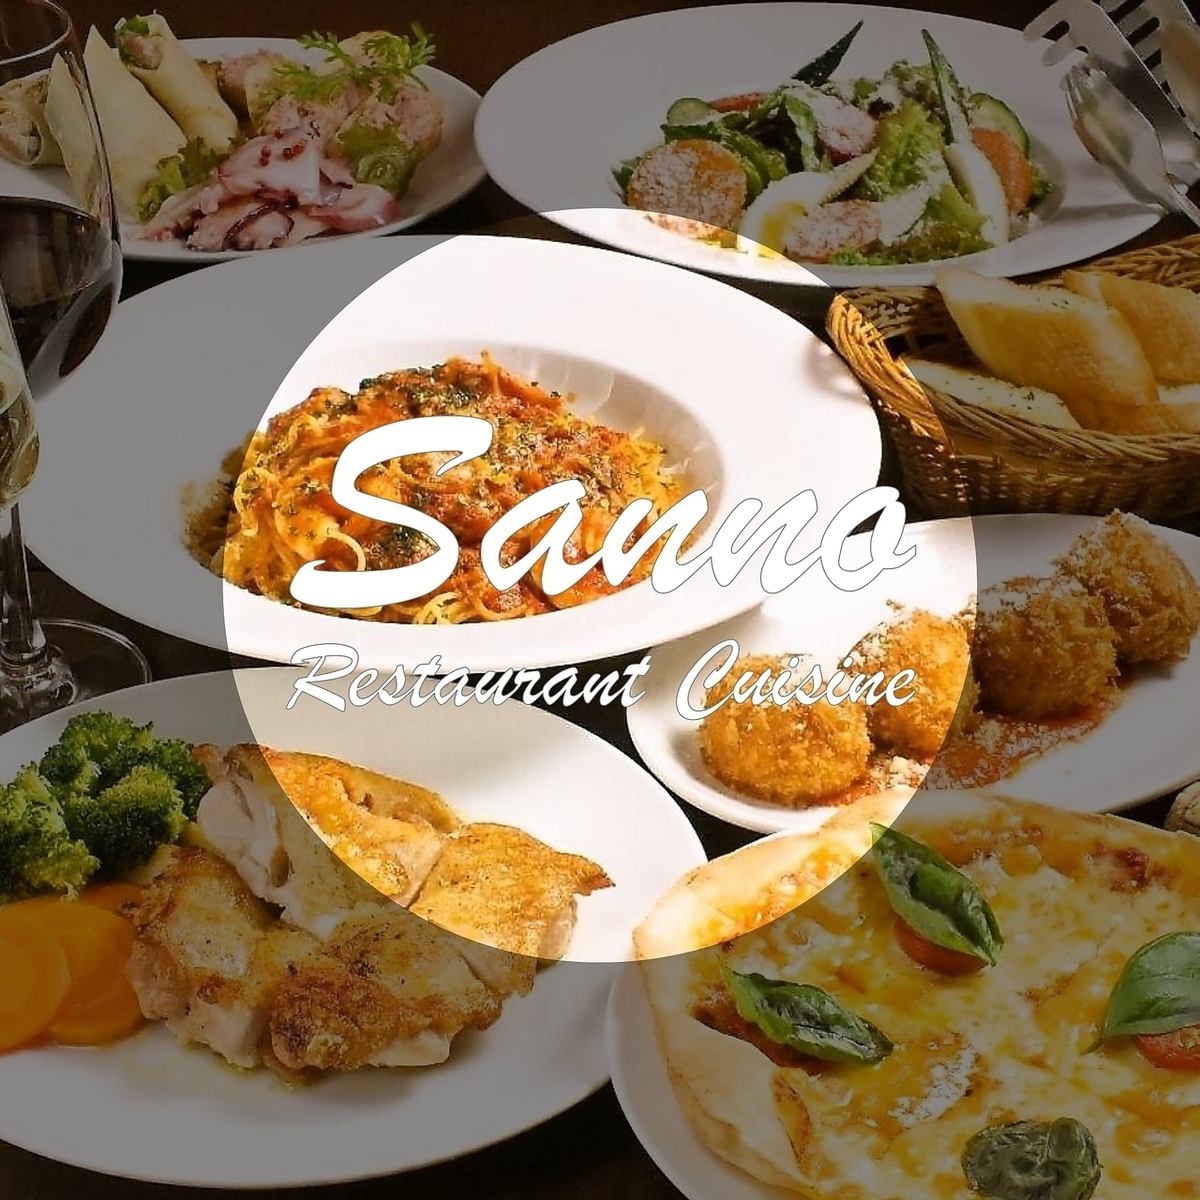 Italian and authentic French cuisine made with carefully selected ingredients♪ Perfect for birthdays, anniversaries, and moments with your loved ones.